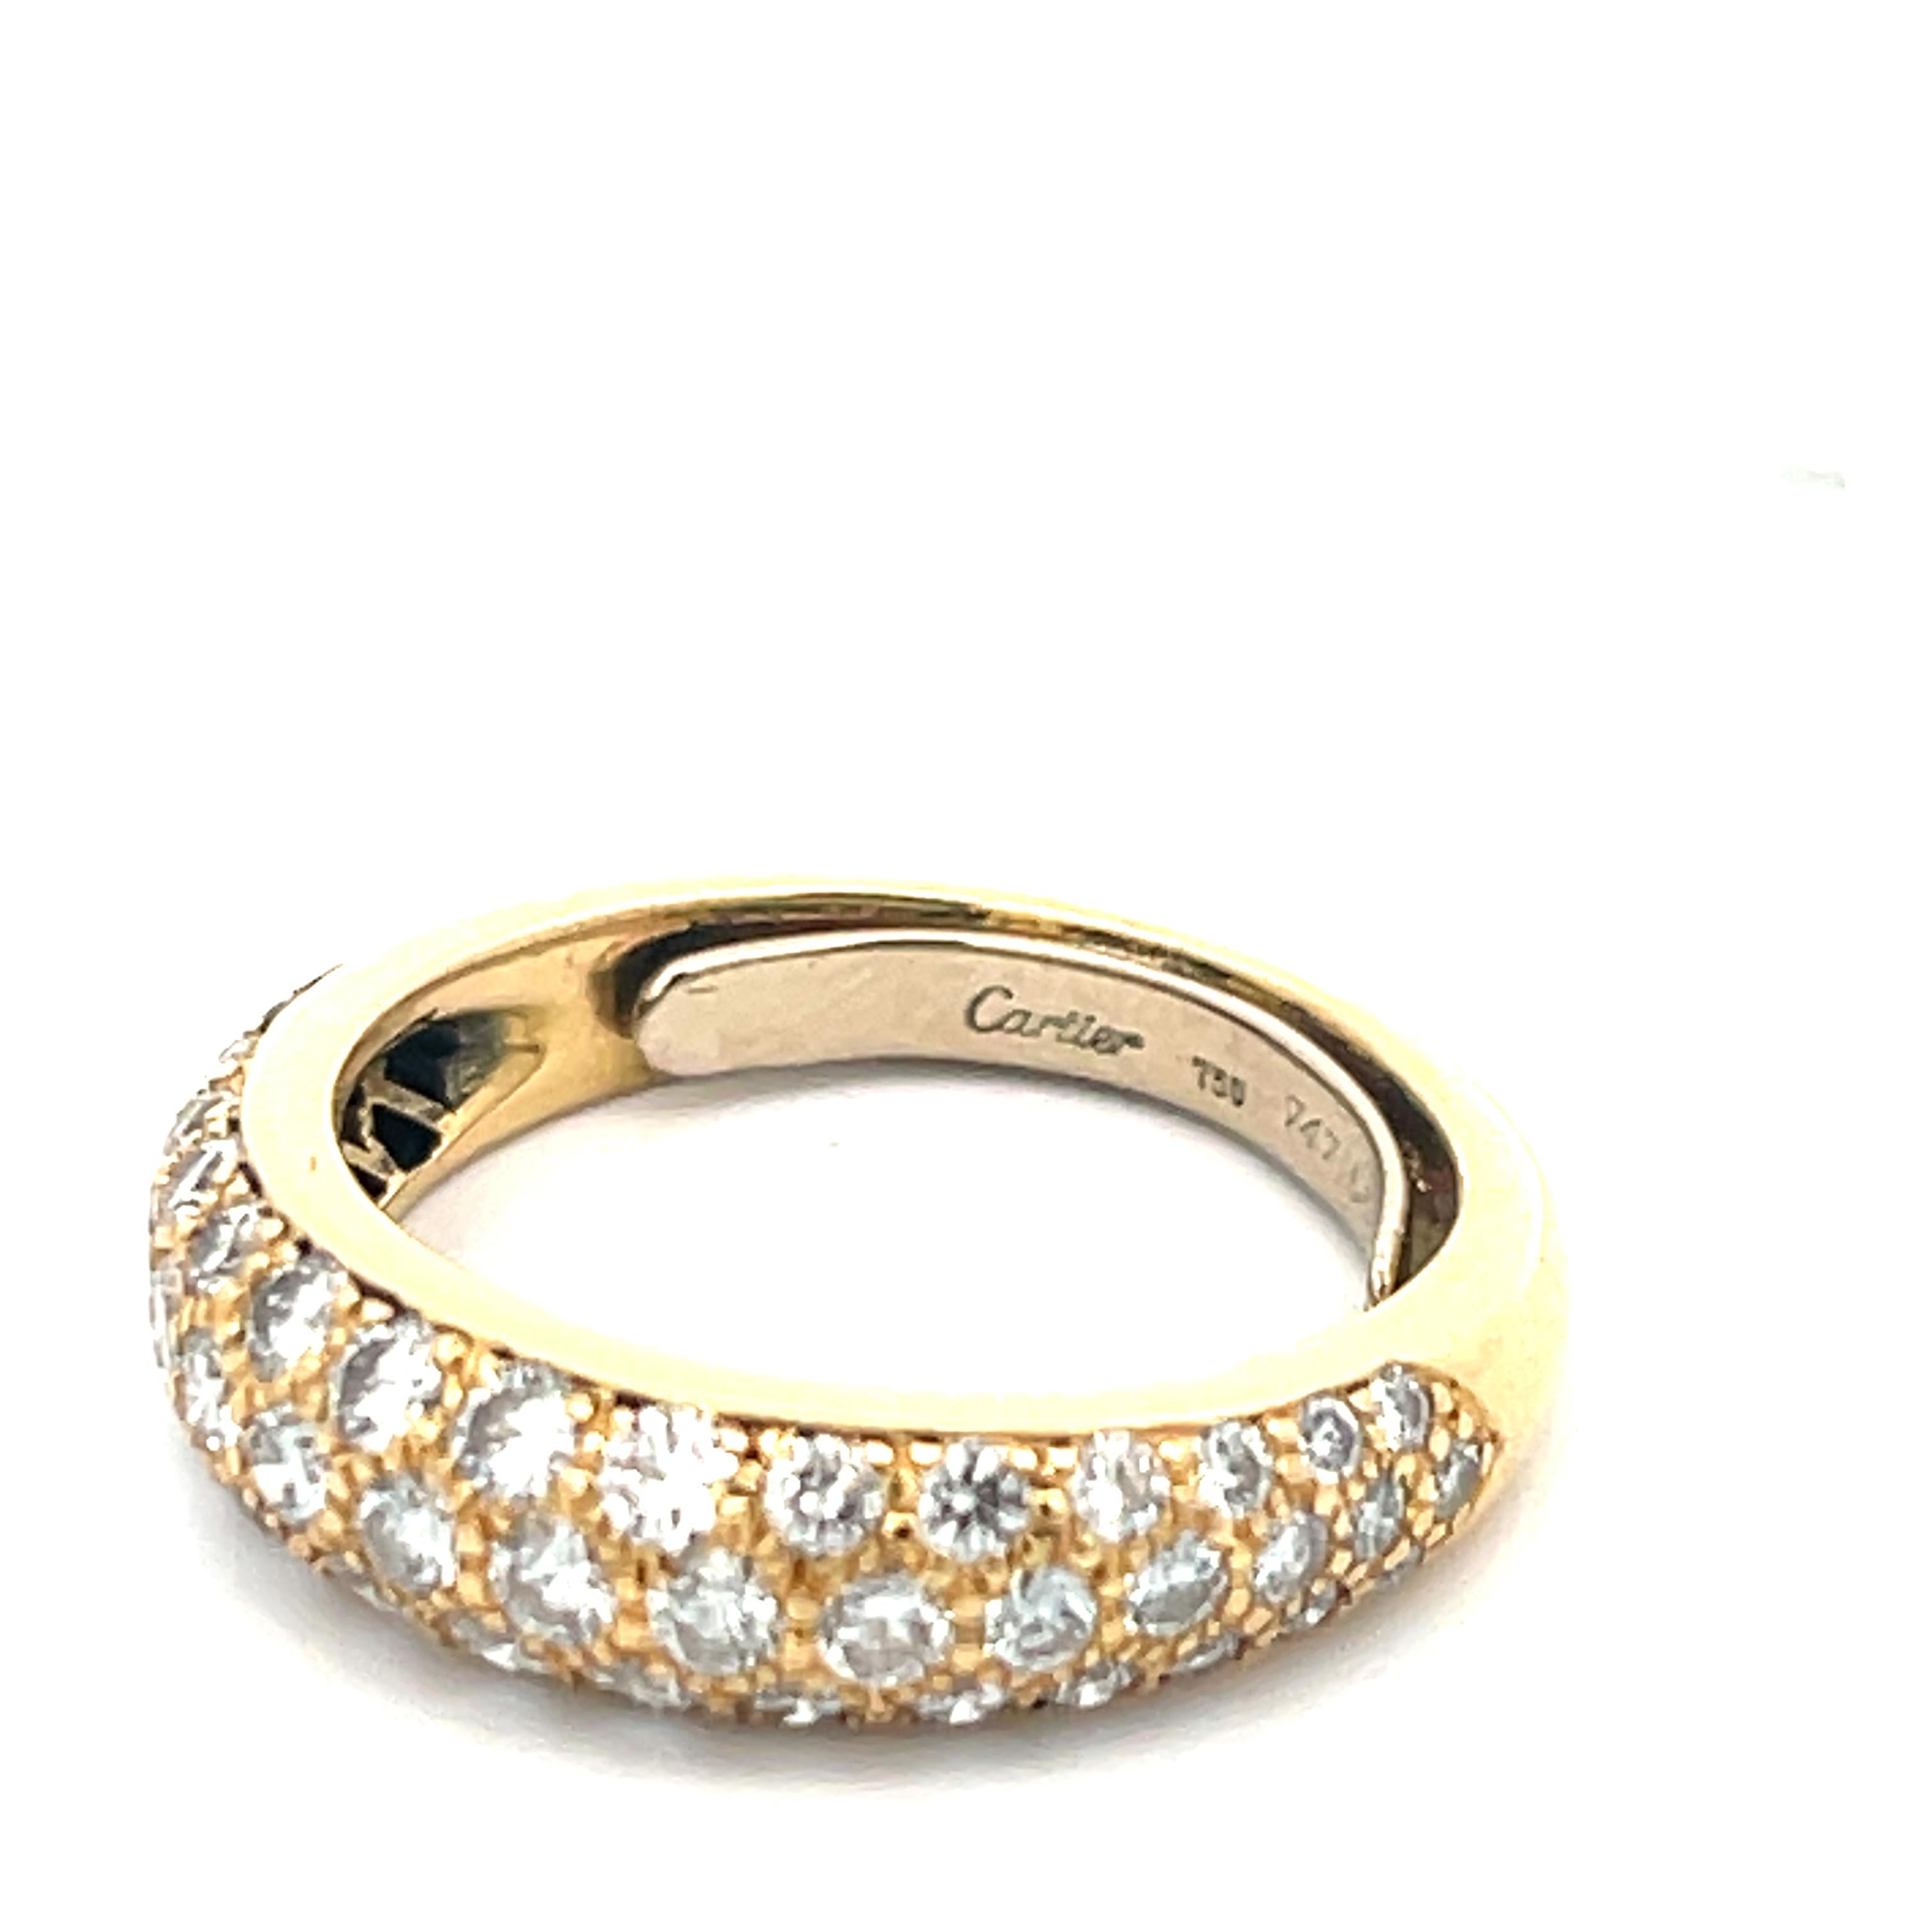 Estate Cartier Pave Diamond Band in 18k Yellow Gold. The band features 1.40ctw of brilliant round cut diamonds. Rind size 5, weighs 4.7 grams, and is 5.25mm wide.